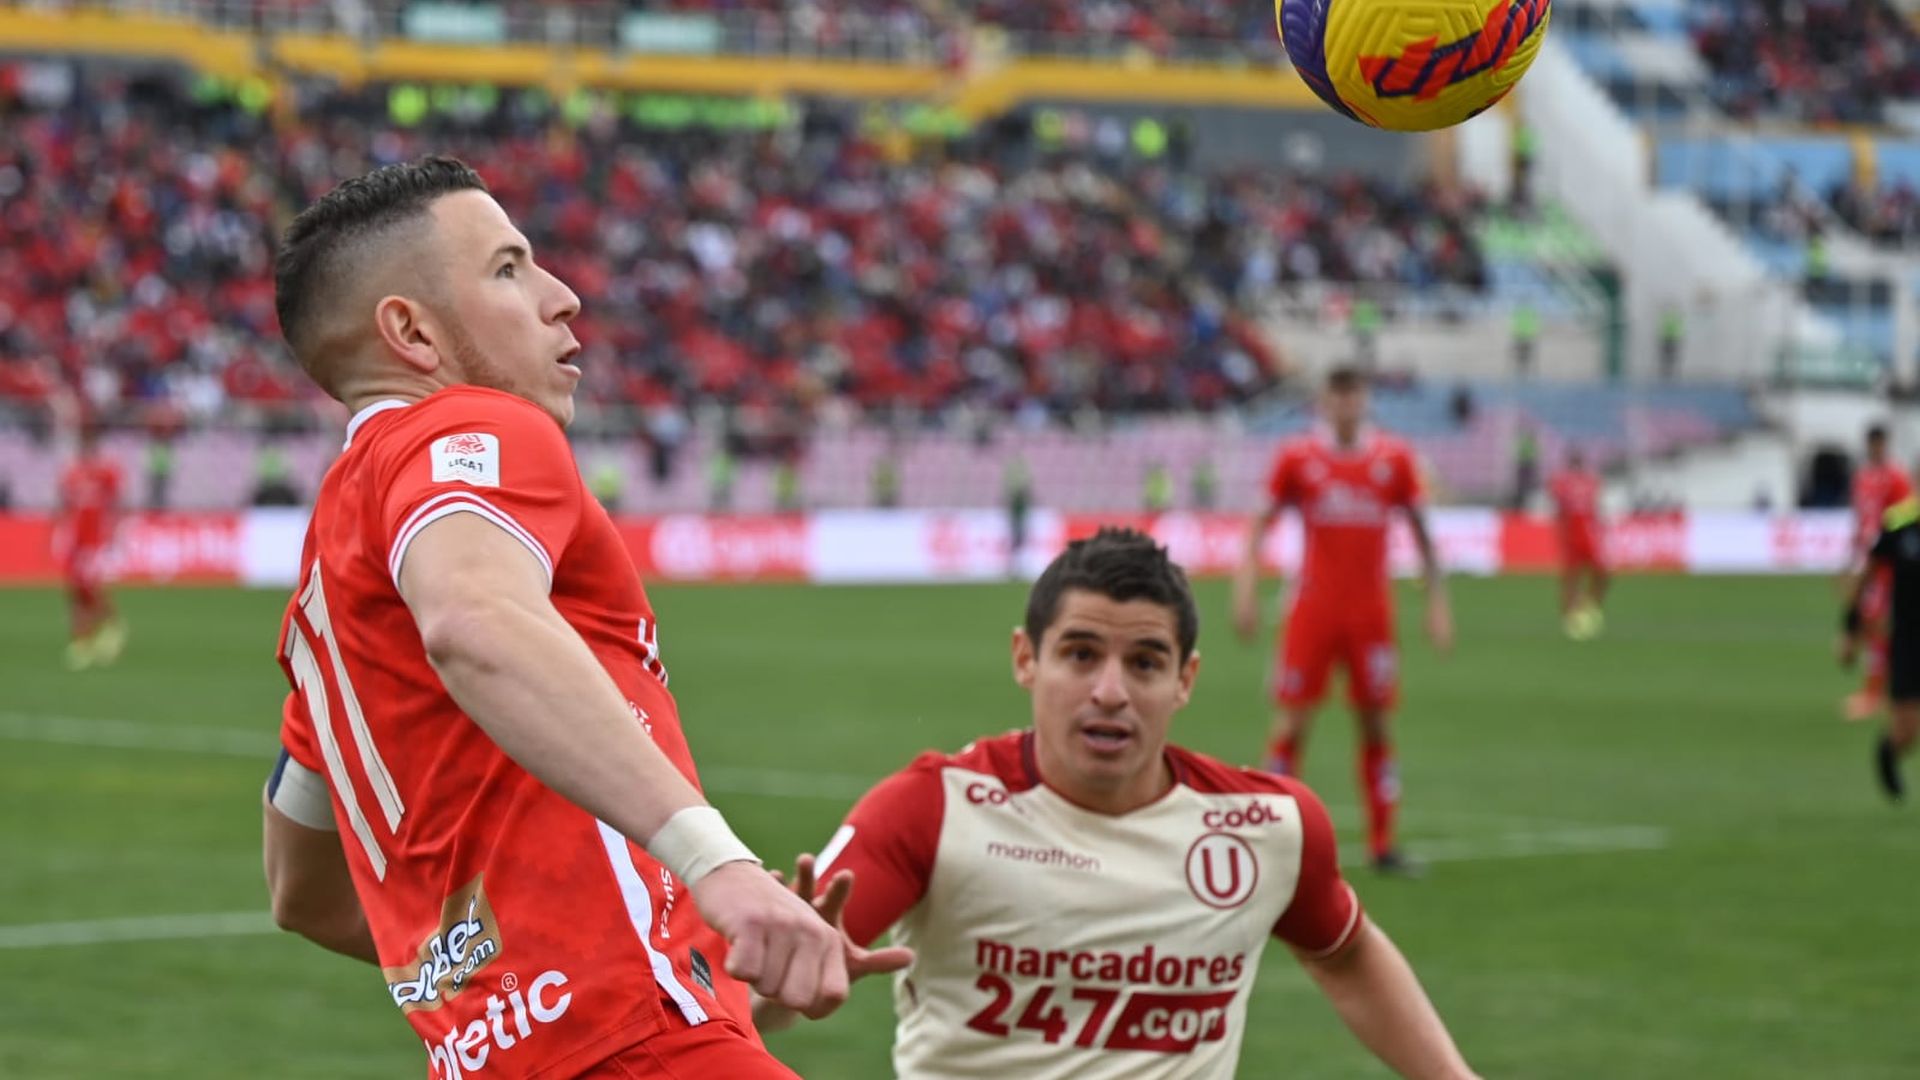 Universitario lost 1-0 to Cienciano in their last match for league 1